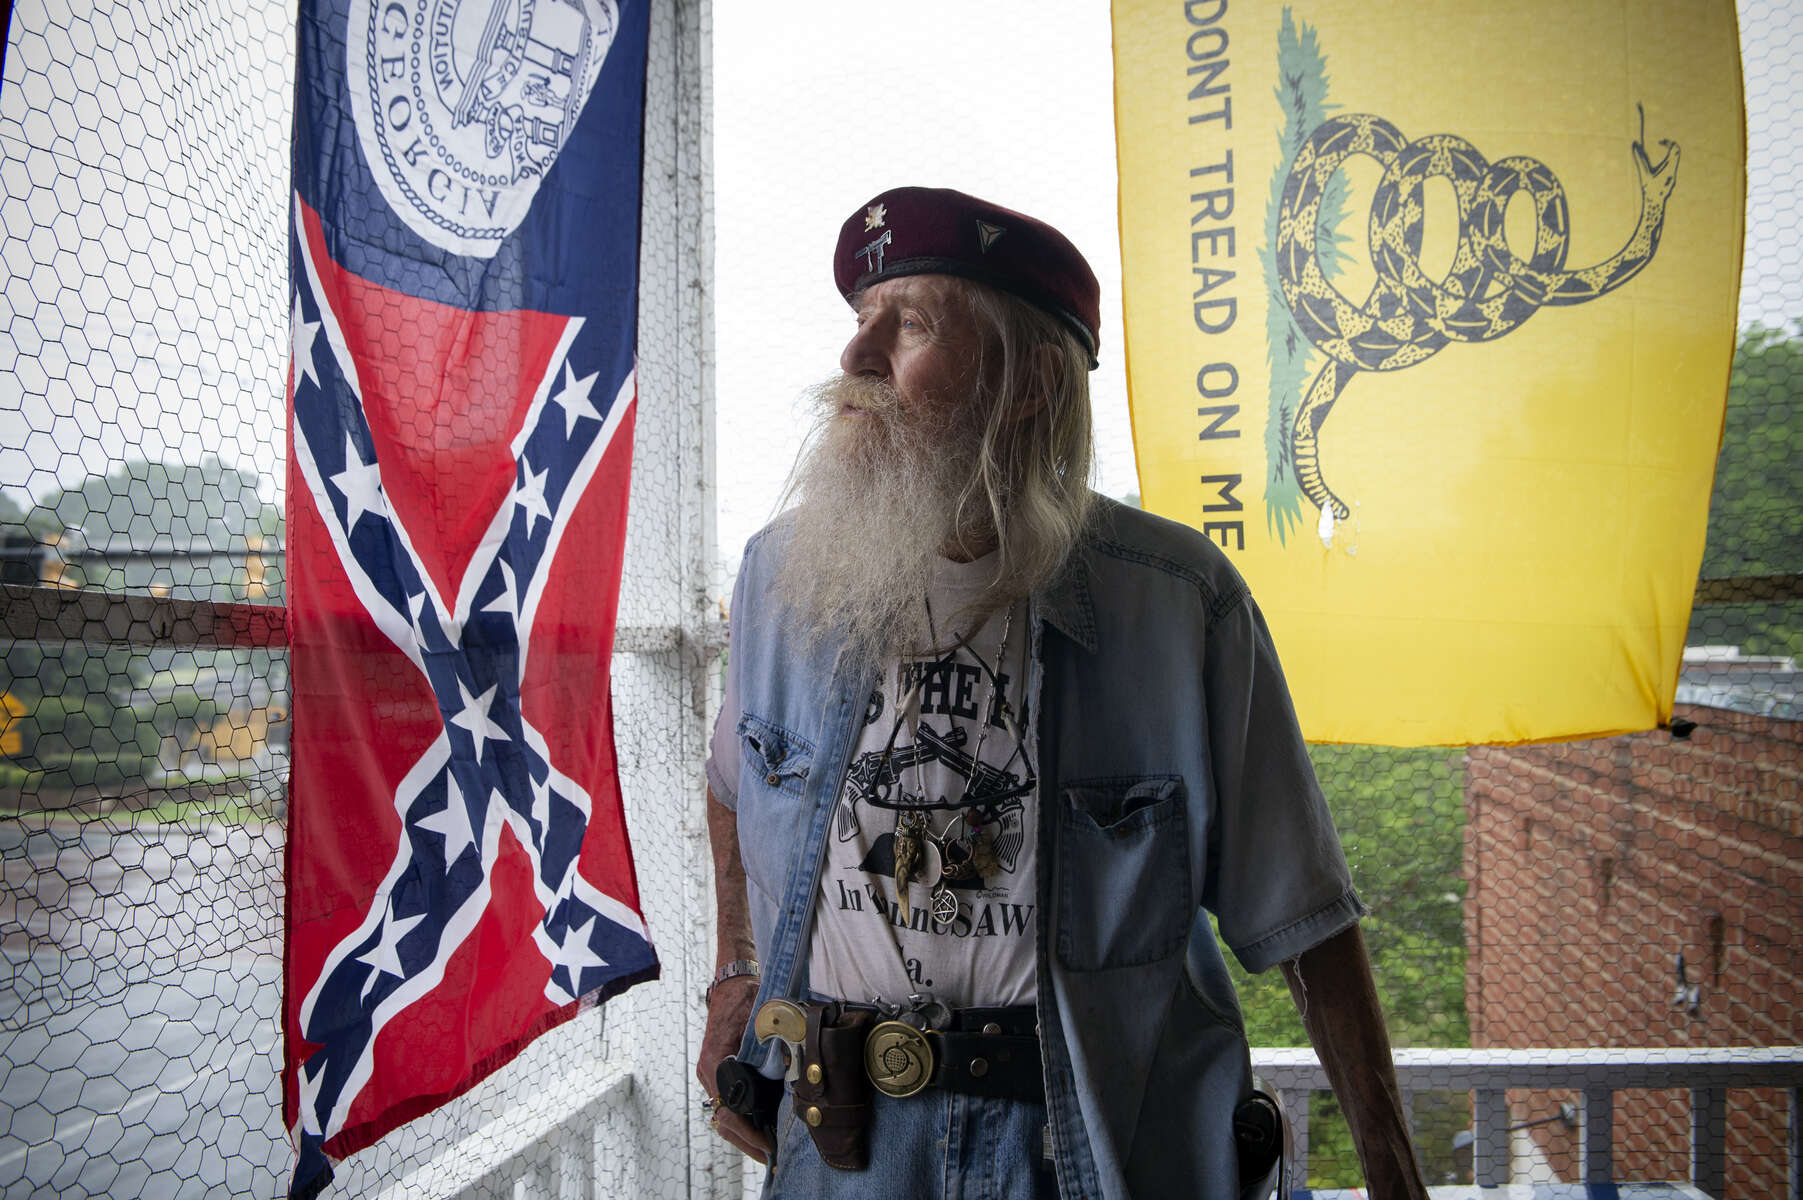 A group of angry demonstrators gathered outside Dent Myers’ Civil War Relic and Antique Shop Friday to protest the 89-year-old owner’s obsession with what they see as a racist and bigoted past. Pictured: Dent Myers on top floor of building that houses his relic shop, keeping an eye on gathering protesters.